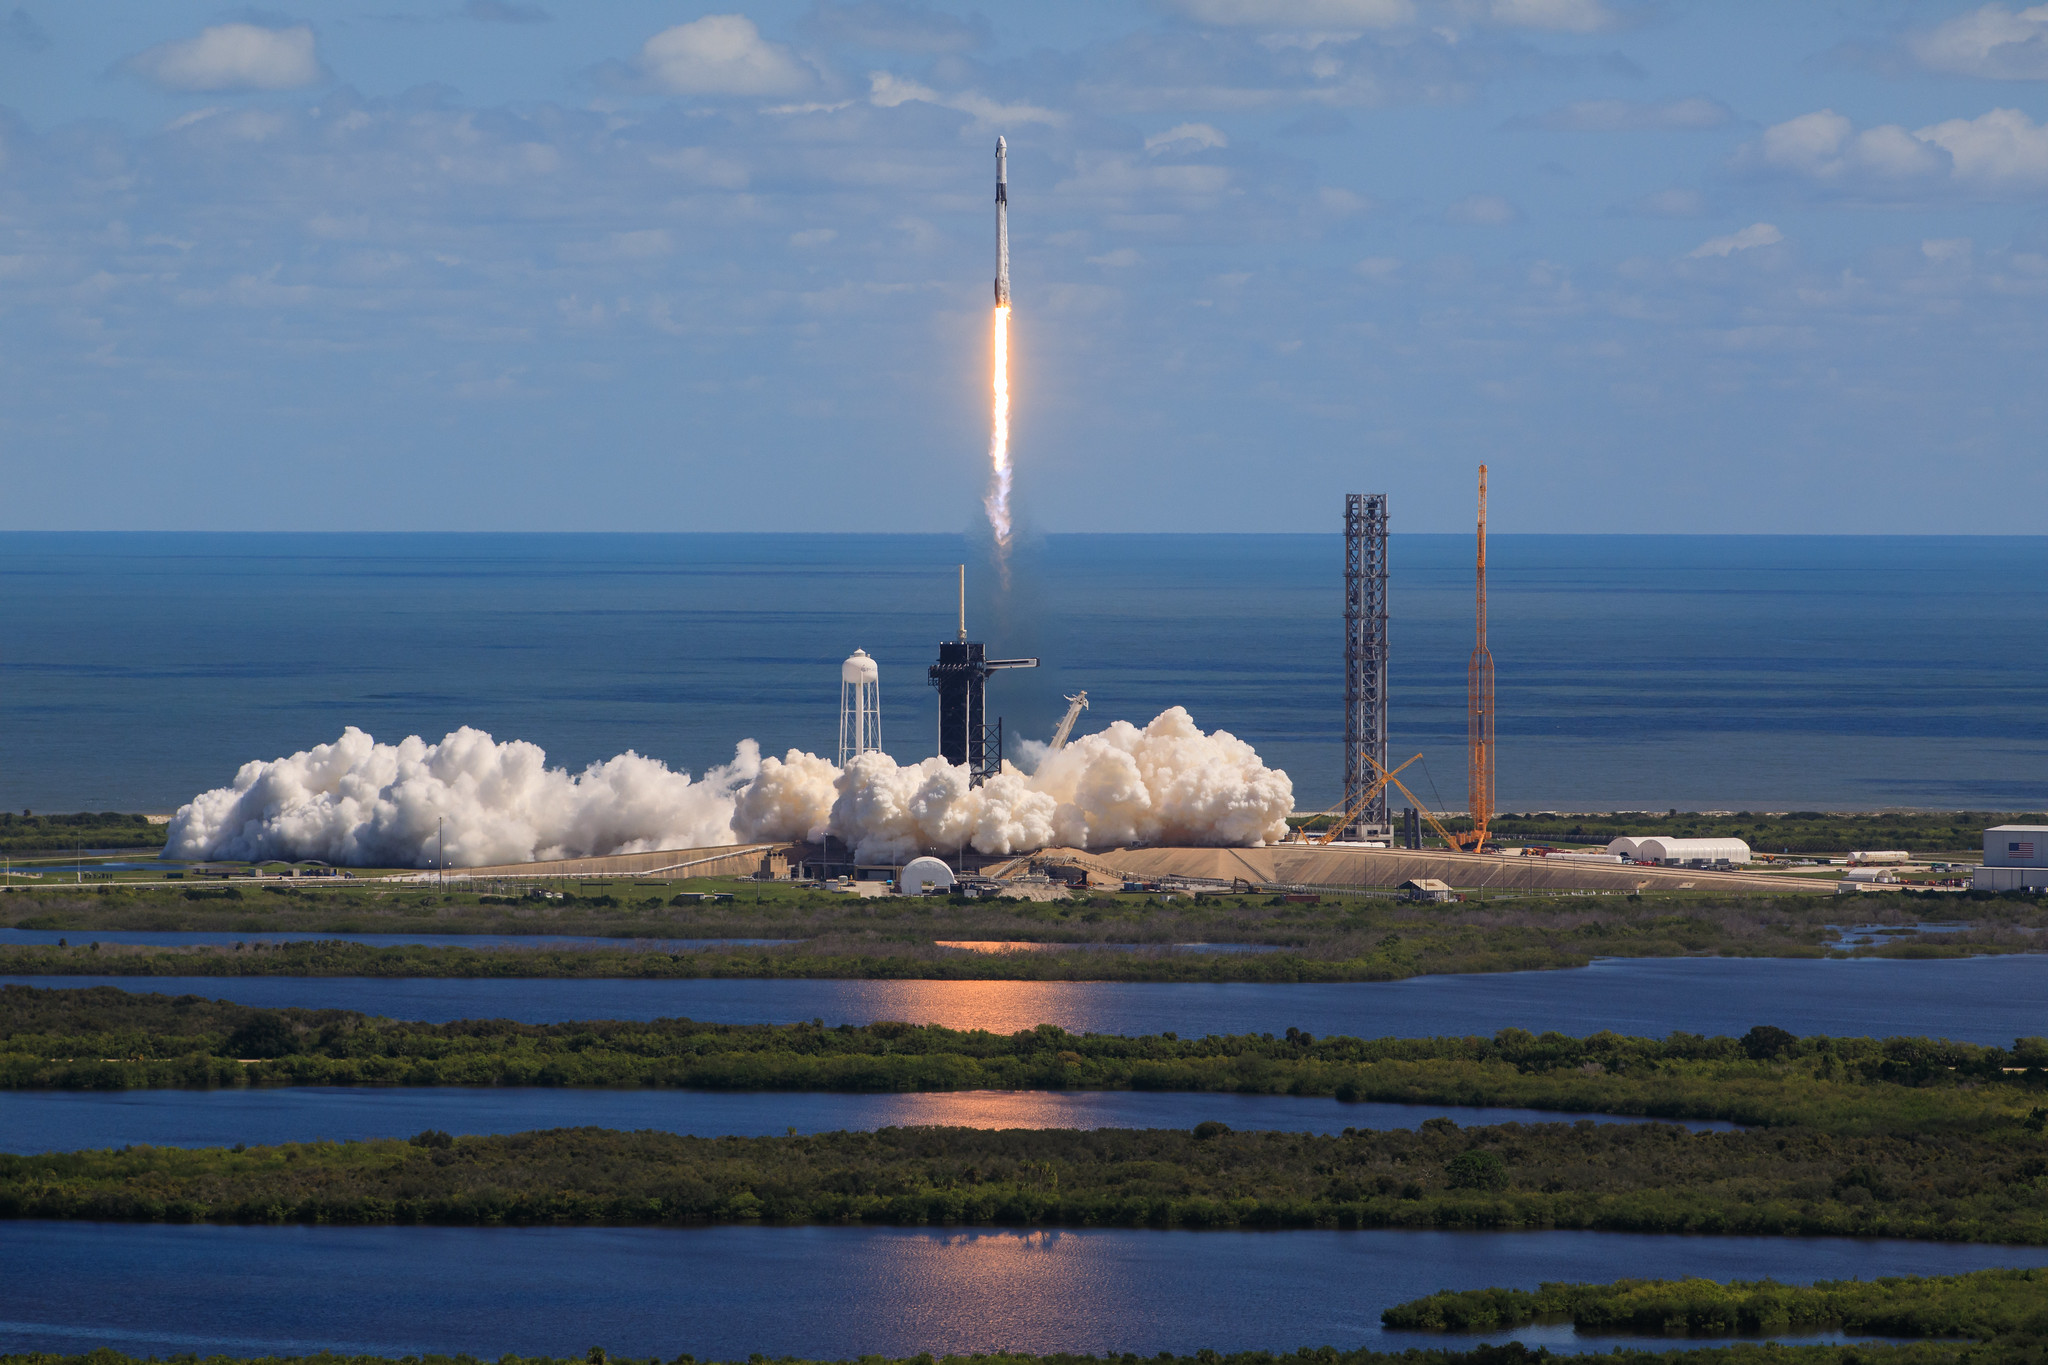 SpaceX’s Falcon 9 rocket, with the Dragon Endurance spacecraft atop, lifts off from NASA’s Kennedy Space Center Launch Complex 39A in Florida on Oct. 5, 2022, on the agency’s SpaceX Crew-5 launch.